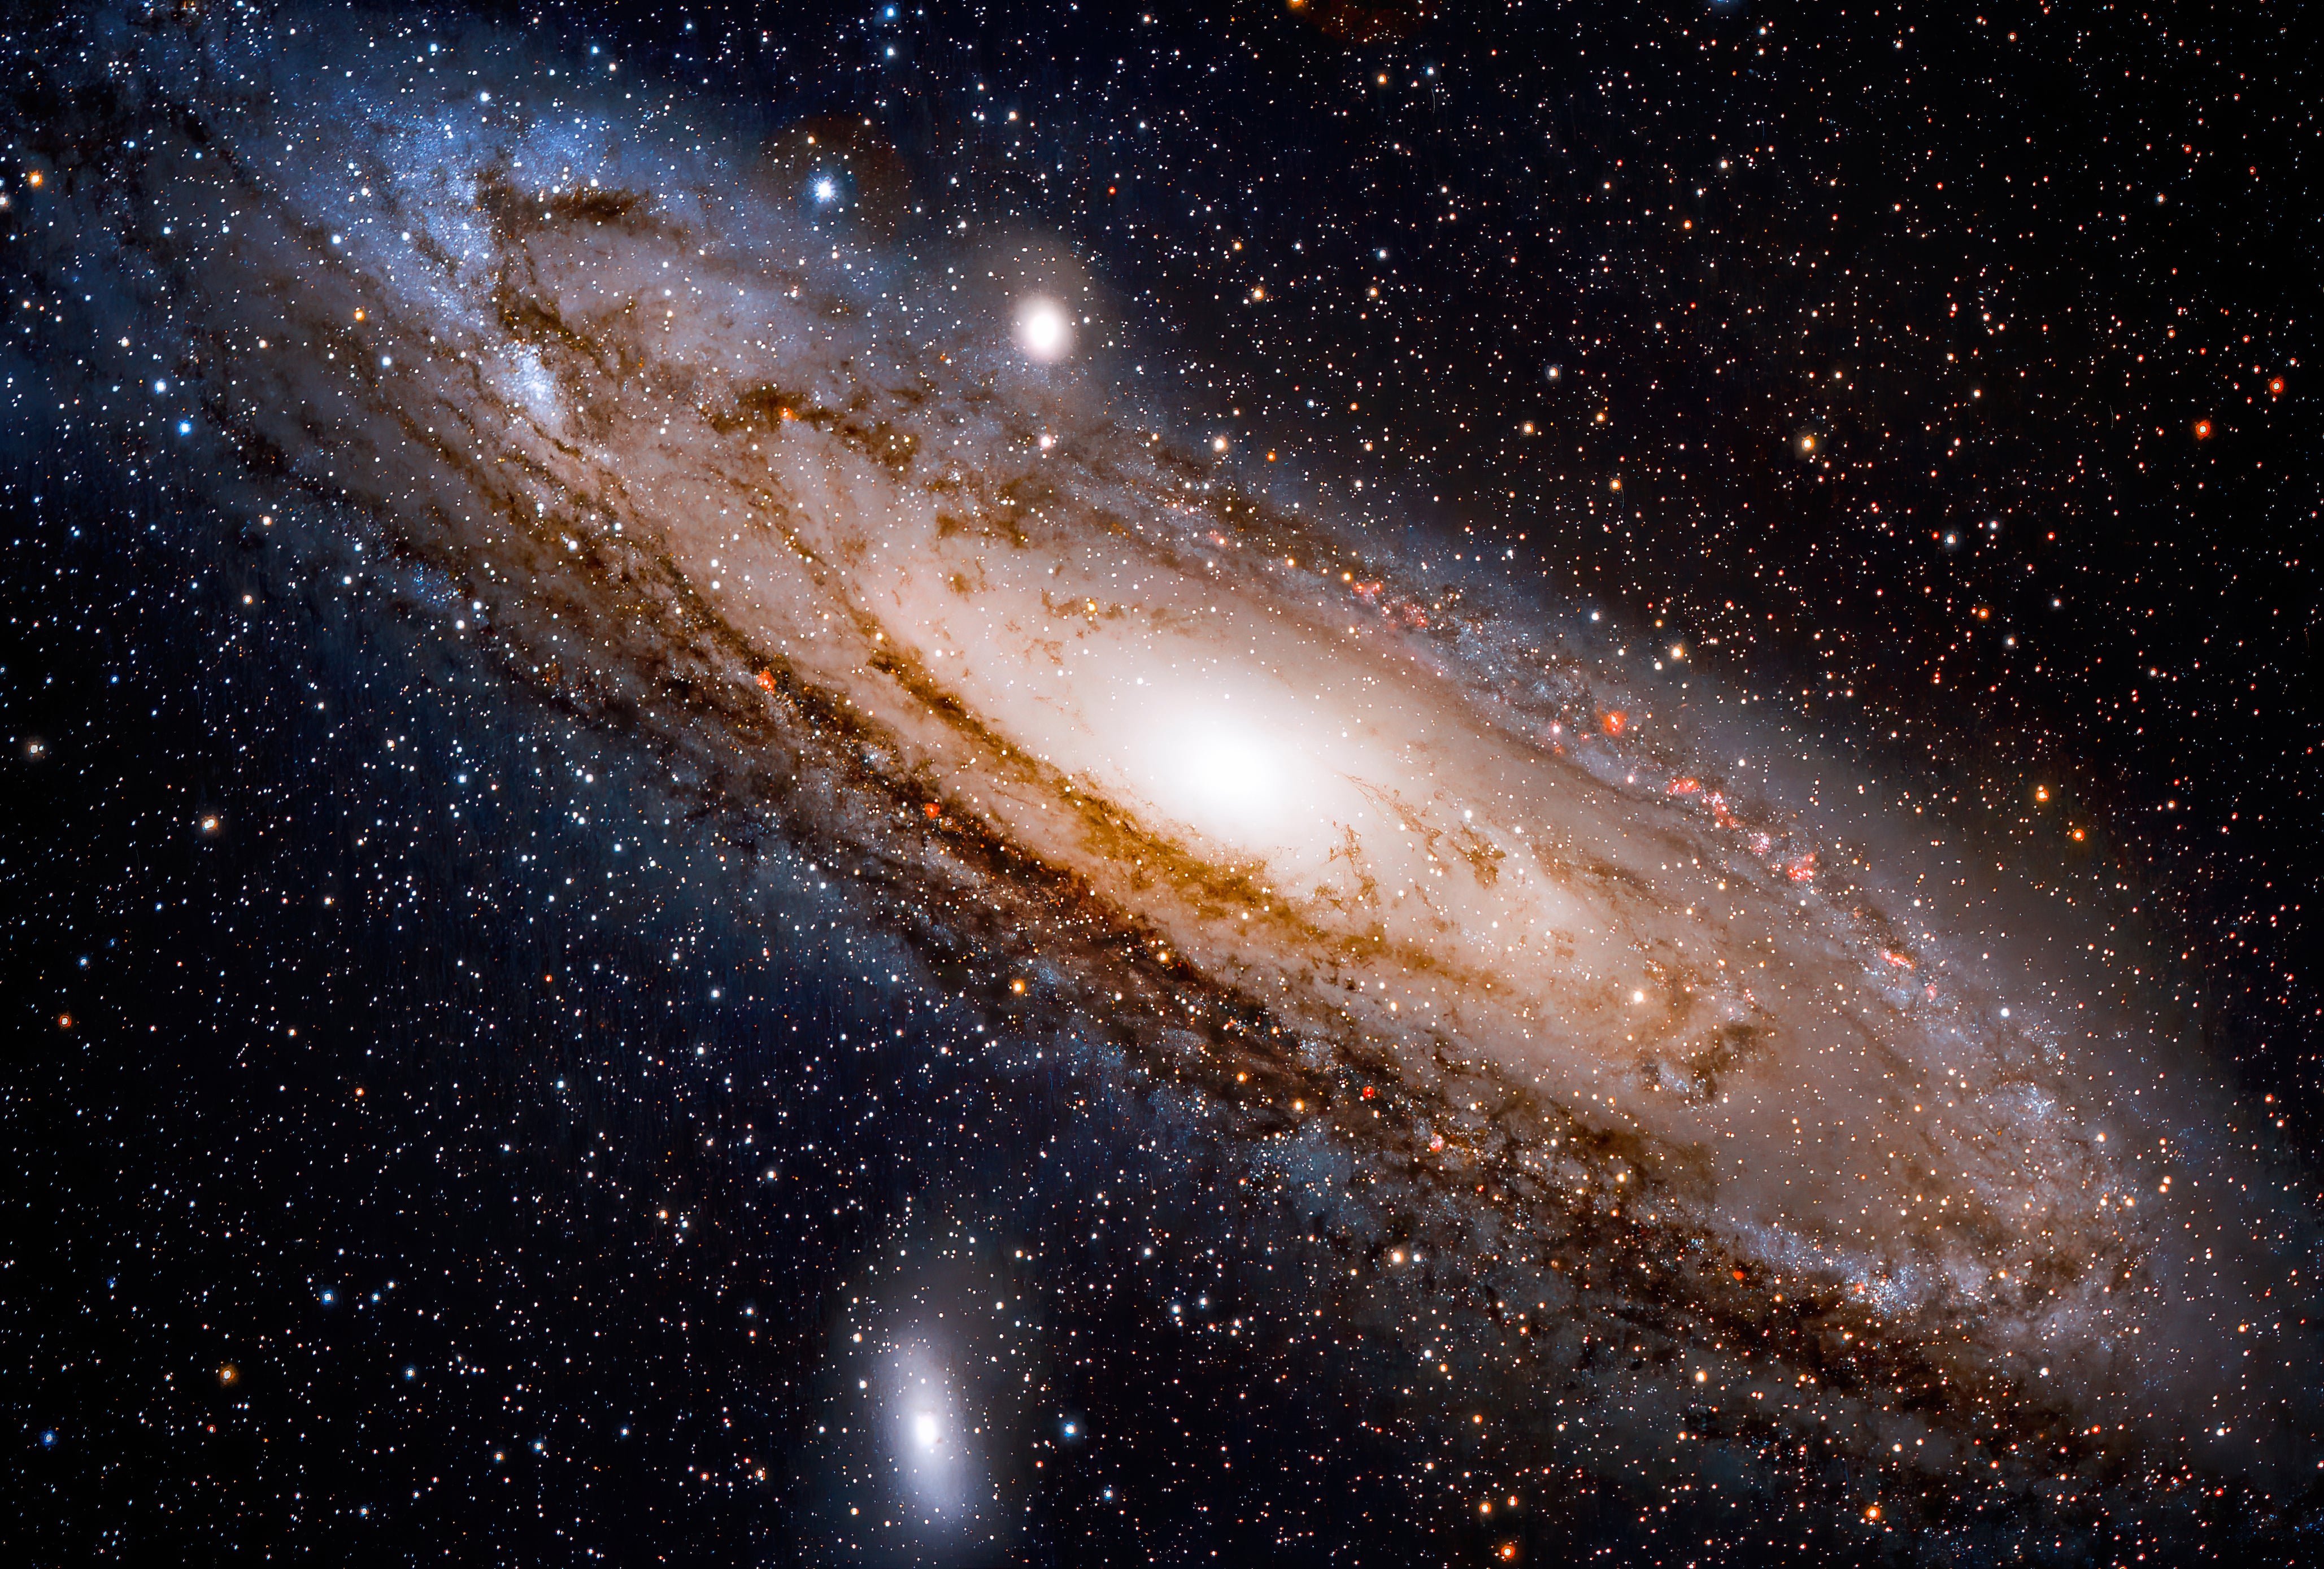 The giant Andromeda galaxy is now well on view